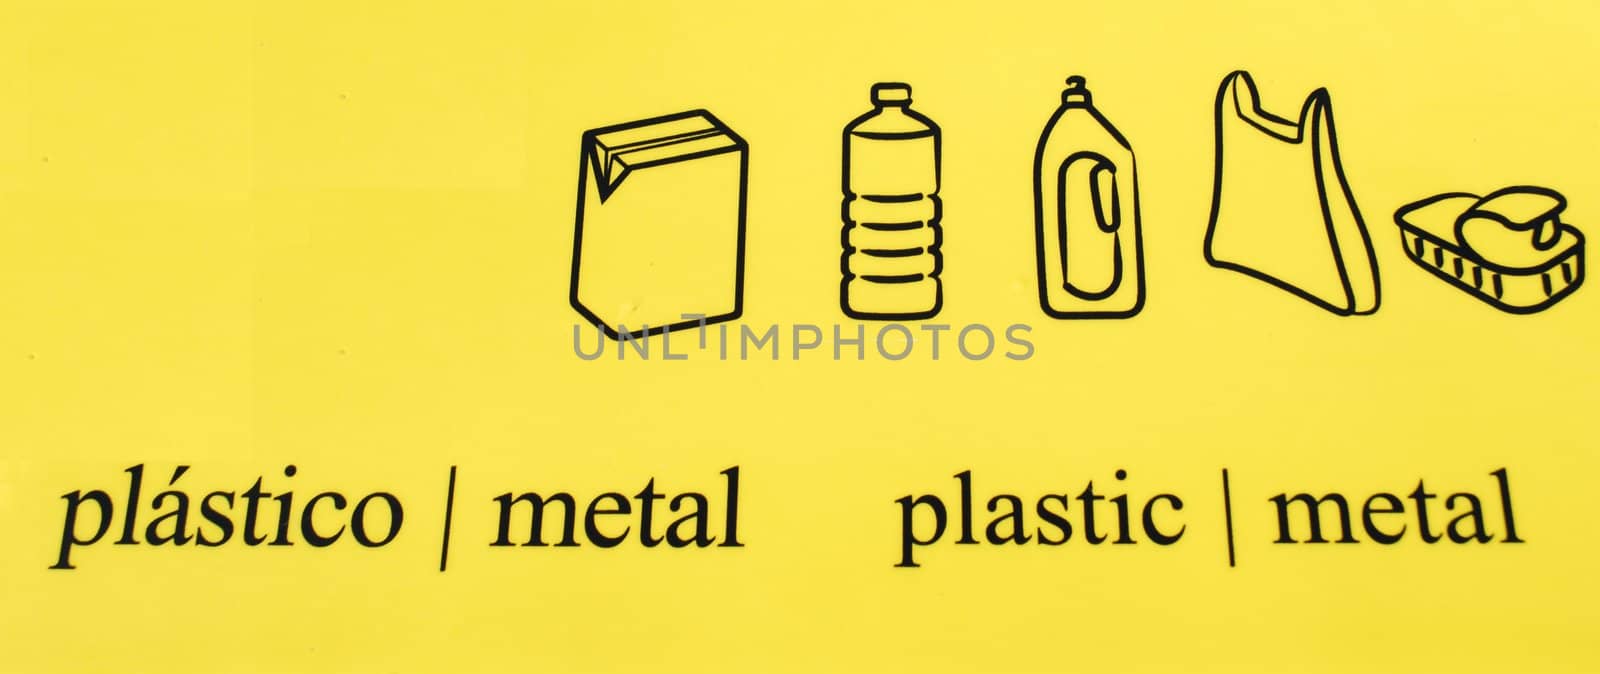 Plastic and Metal recycle symbols in different languages by luissantos84